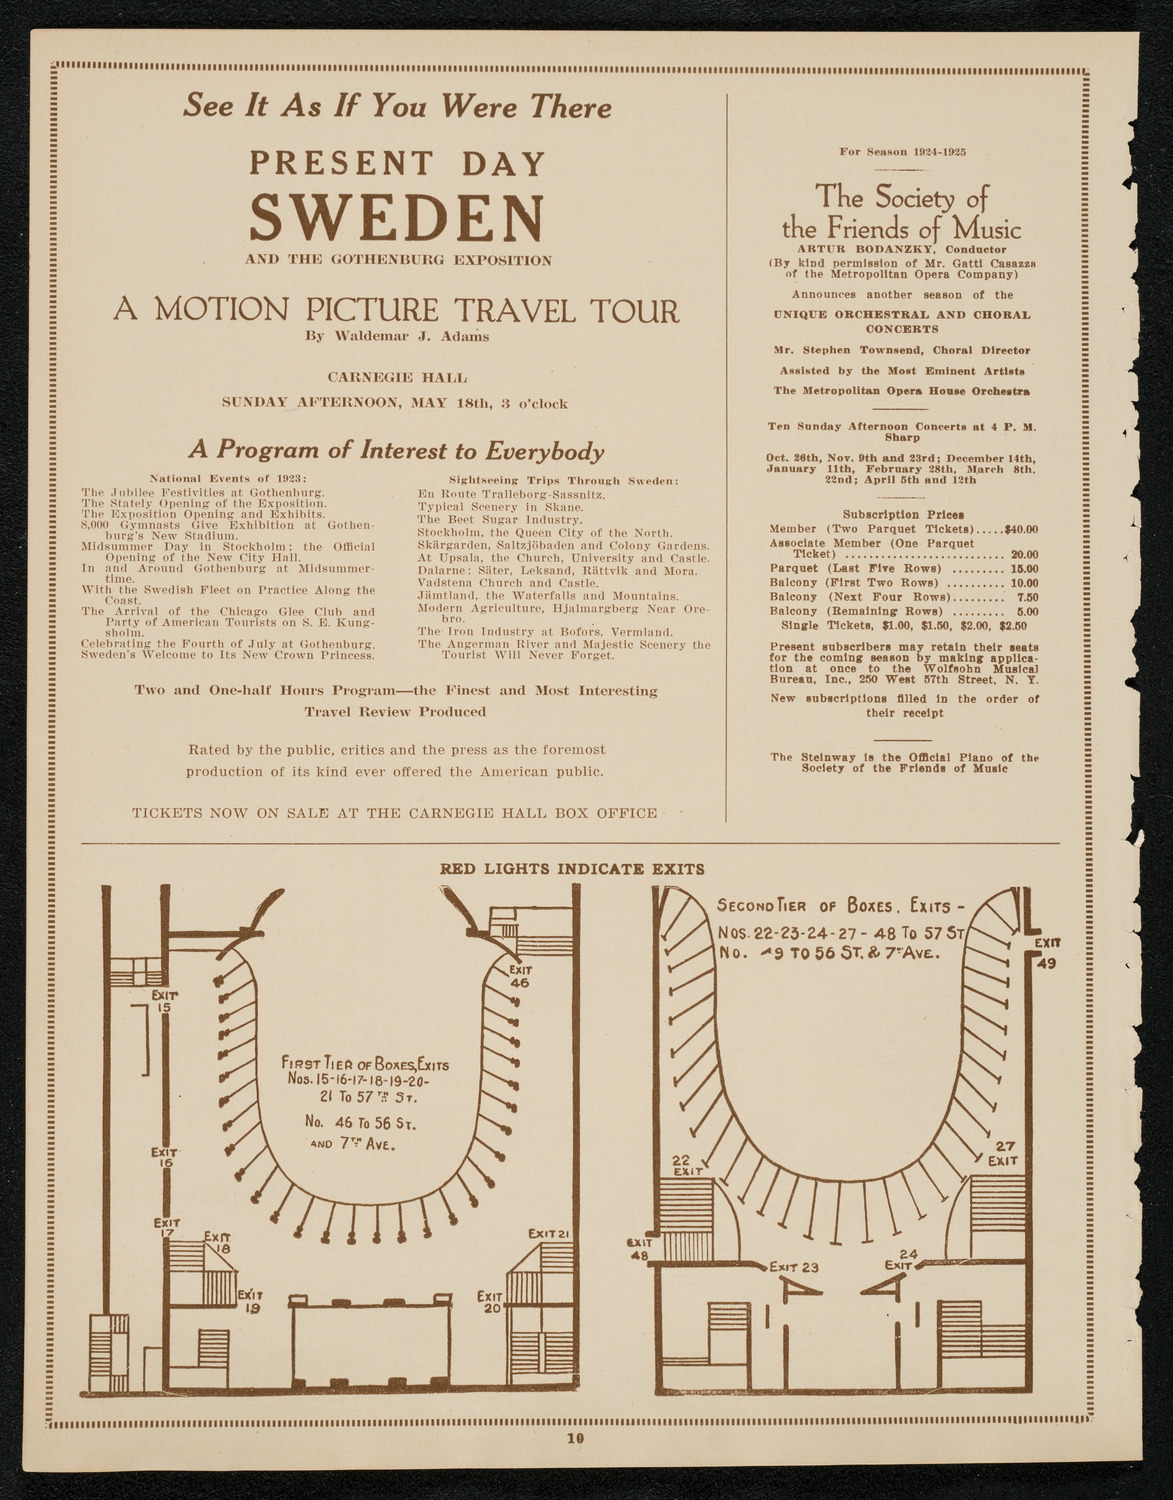 Present Day Sweden and the Gothenburg Exposition, May 18, 1924 program page 10